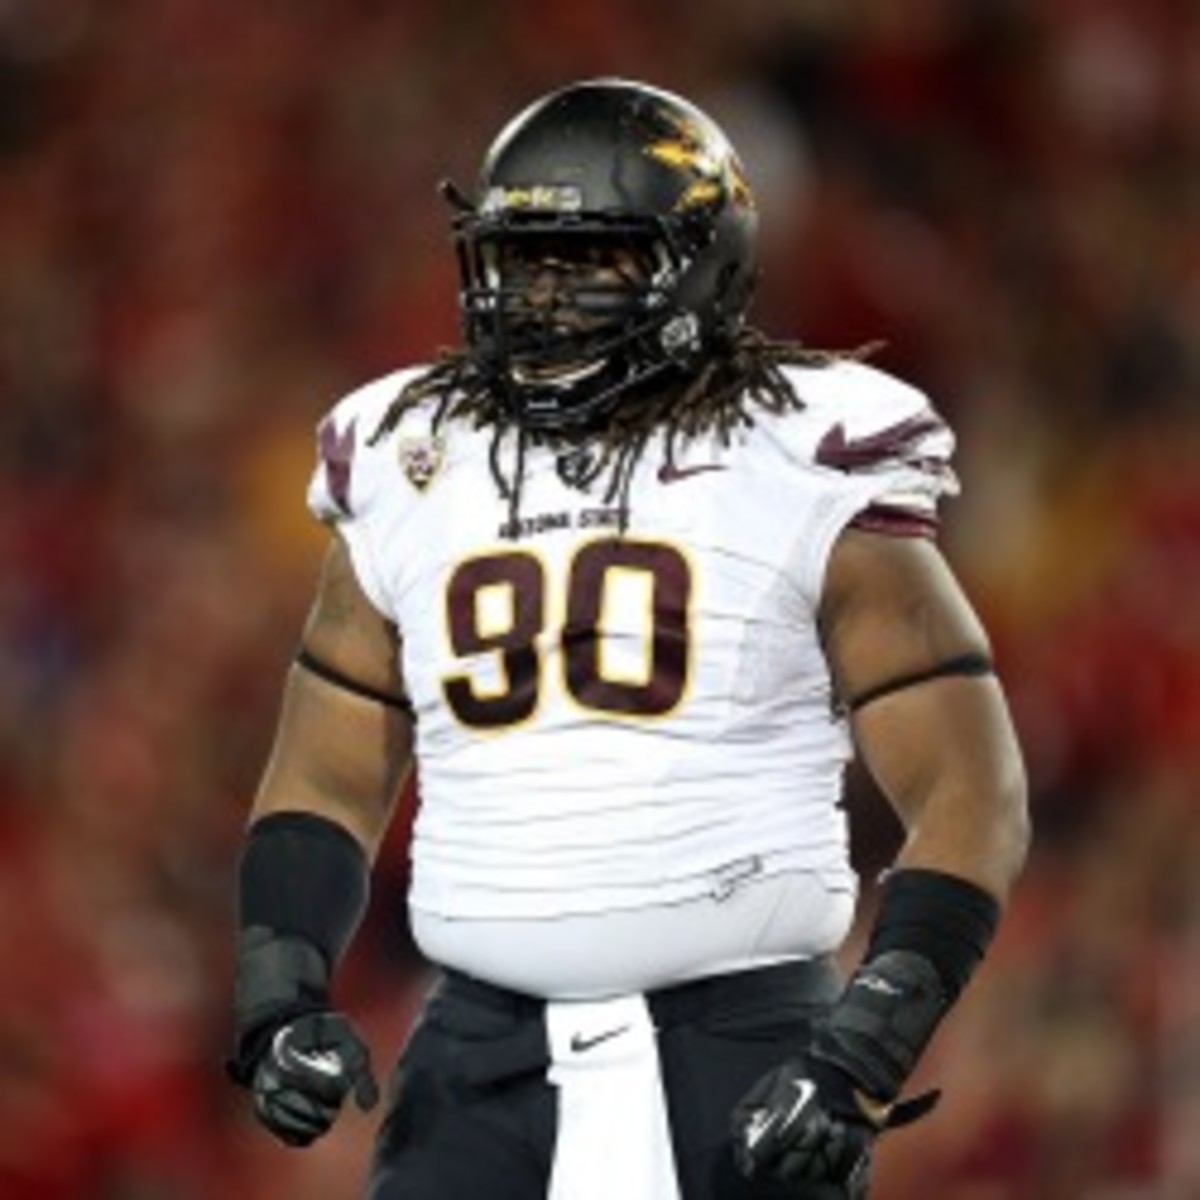 Arizona State defensive tackle Will Sutton will return to school for his senior year. (Christian Petersen/Getty Images)